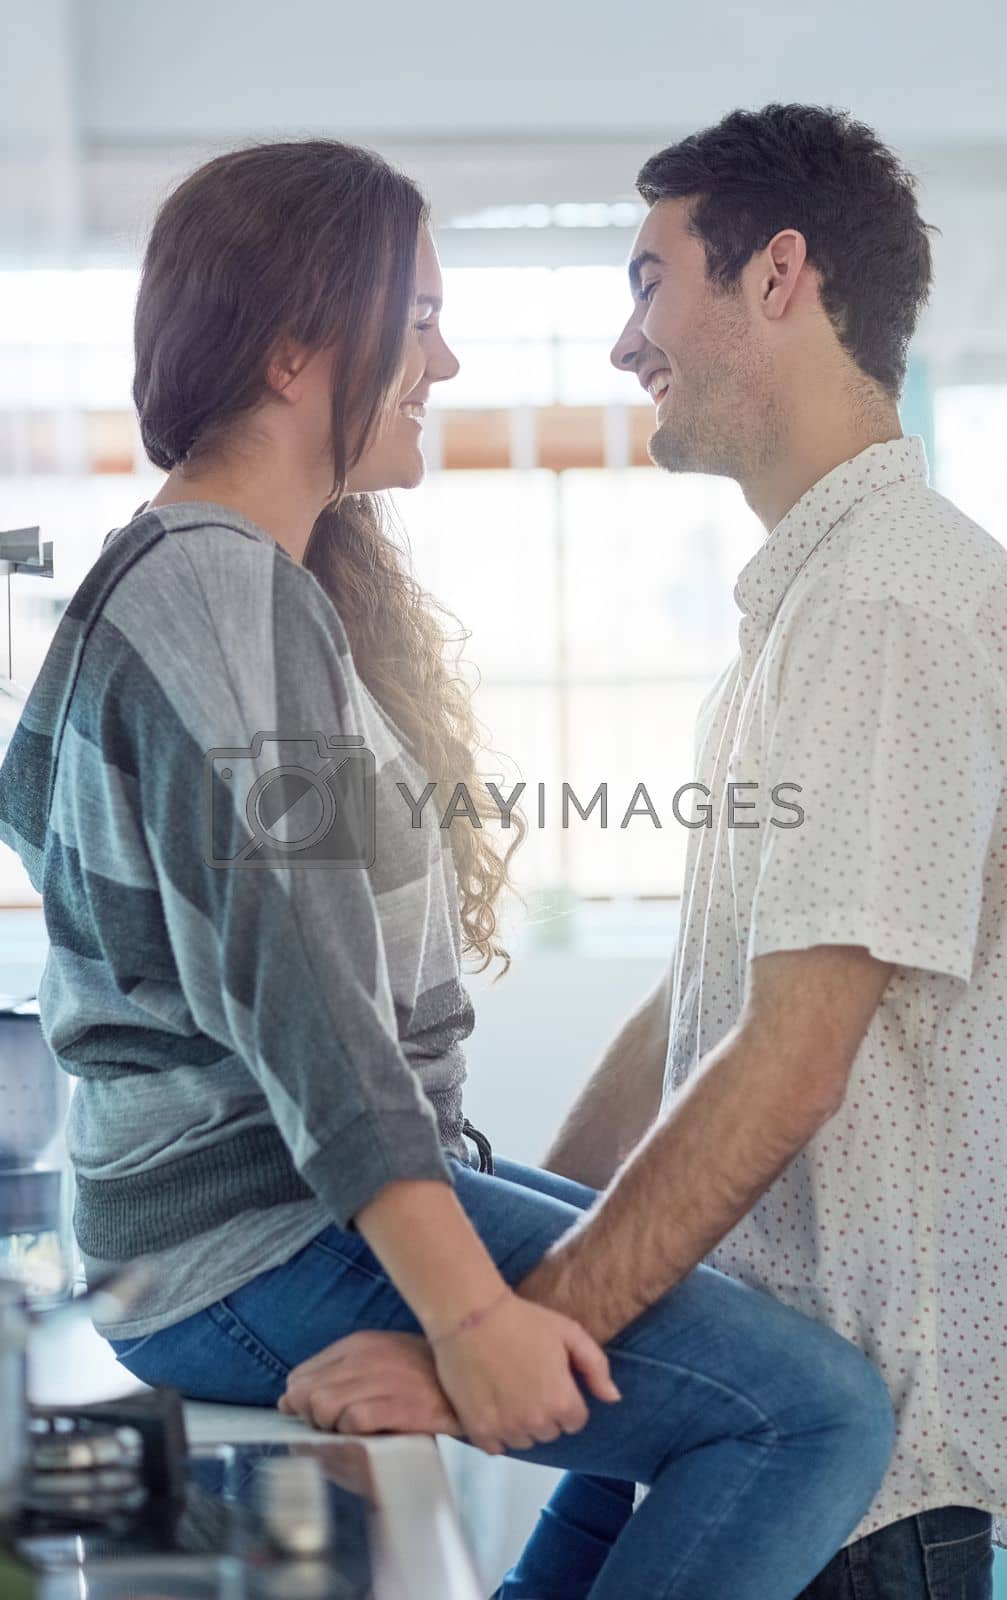 Royalty free image of They never tire of each others company. a young couple having fun in the kitchen while relaxing at home. by YuriArcurs